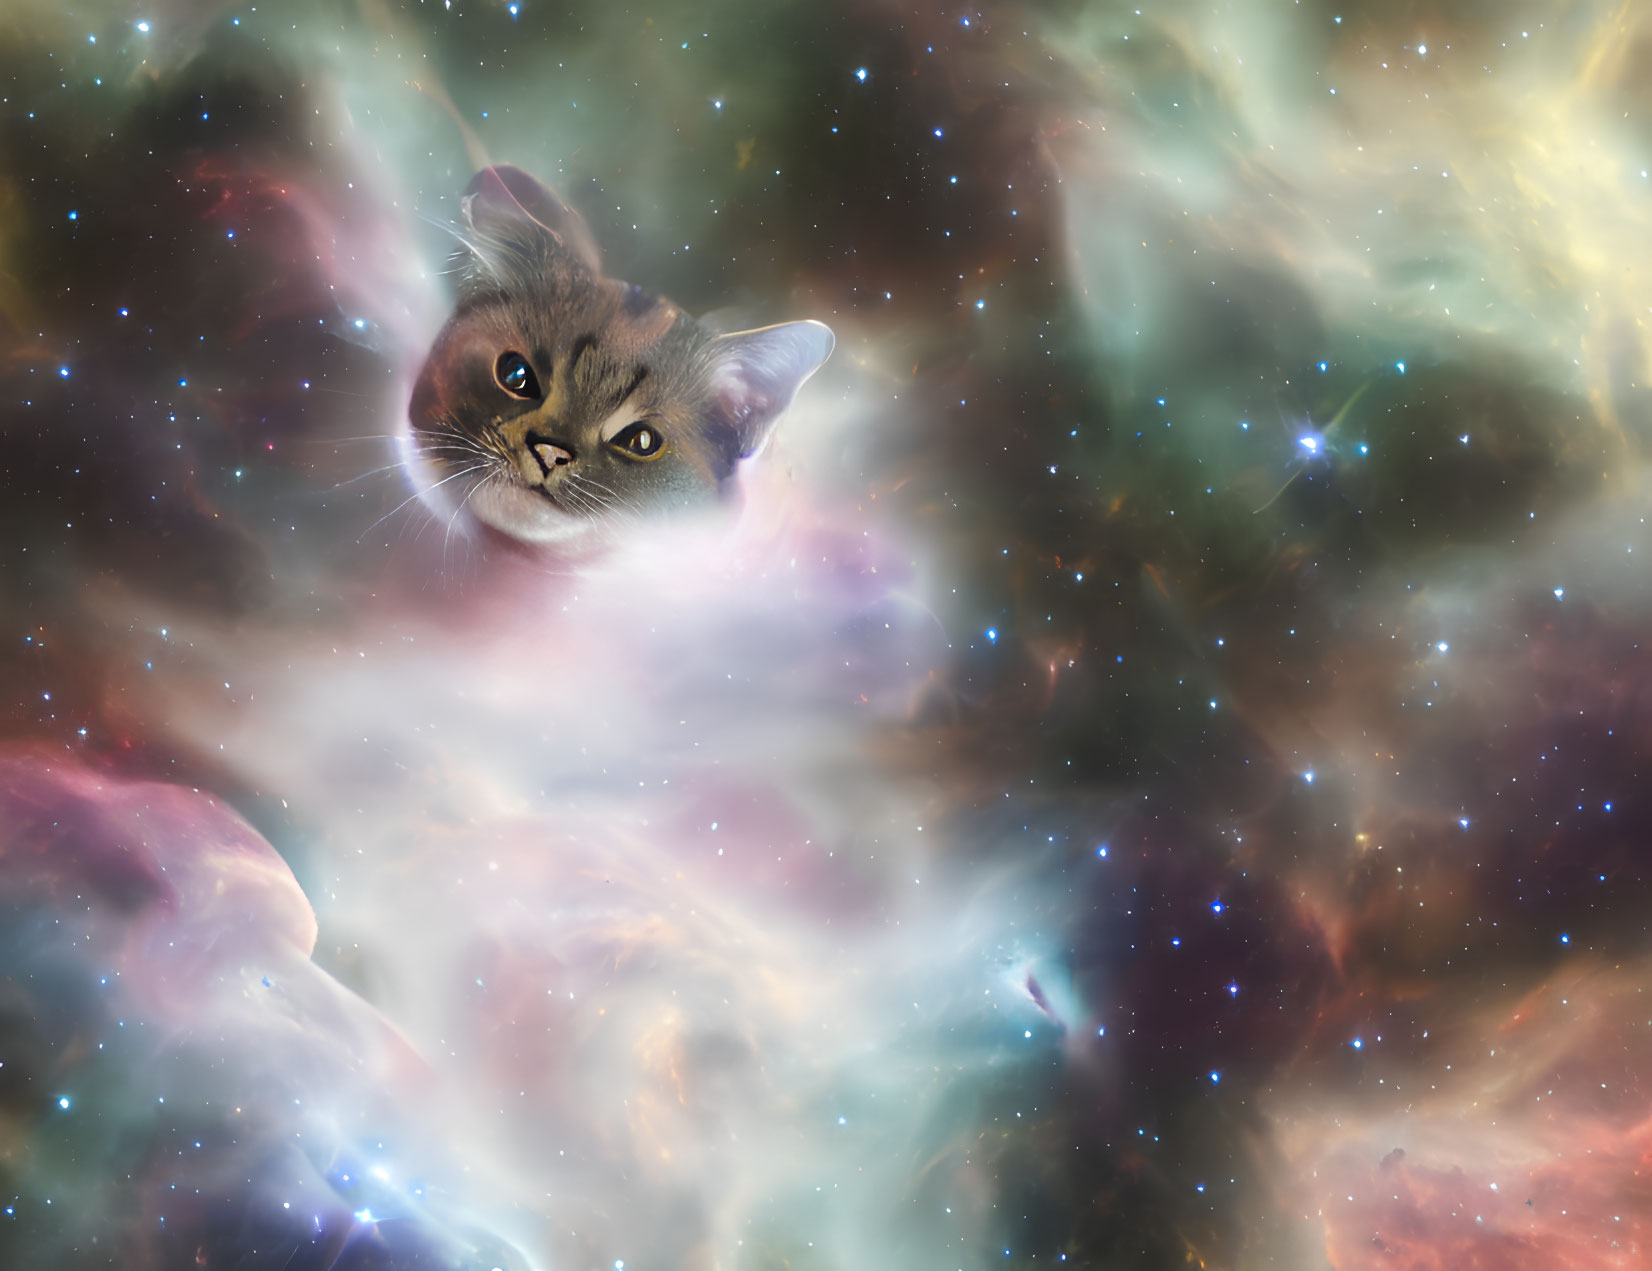 Cat's face merged with cosmic nebula in vibrant image